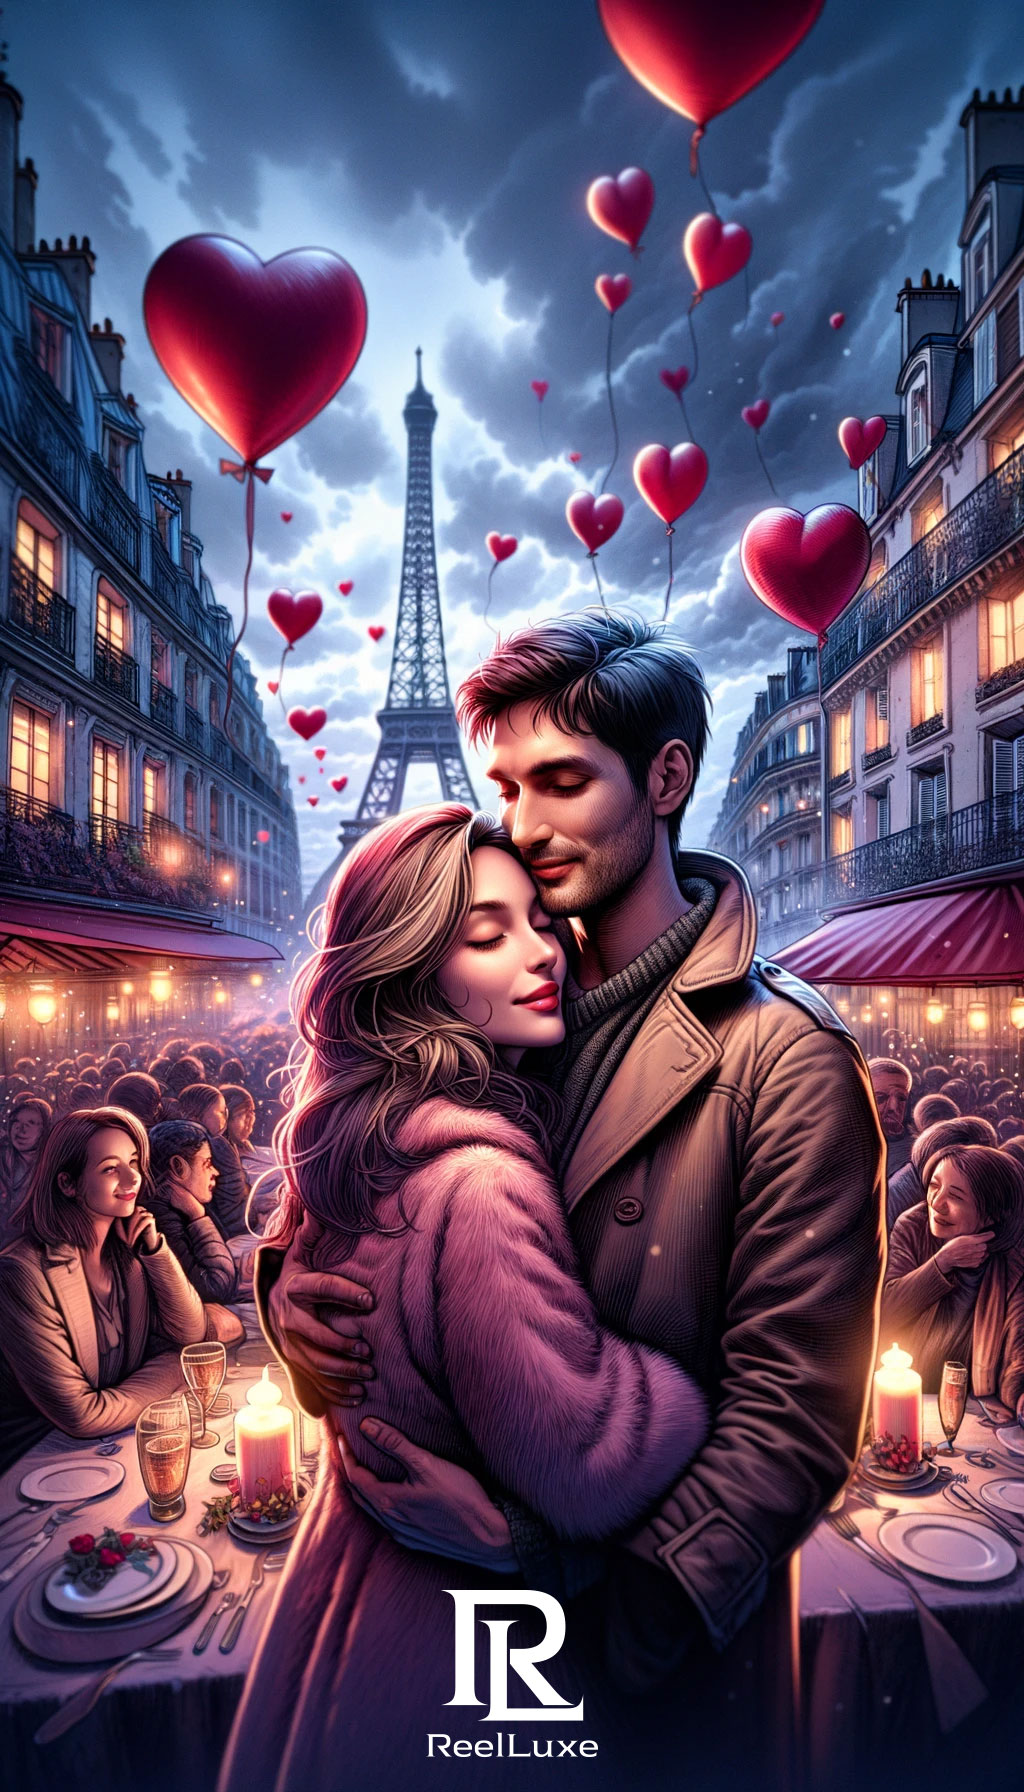 Romance in the Air - Valentine's Day - Beauty and Fashion - Paris, France - 3